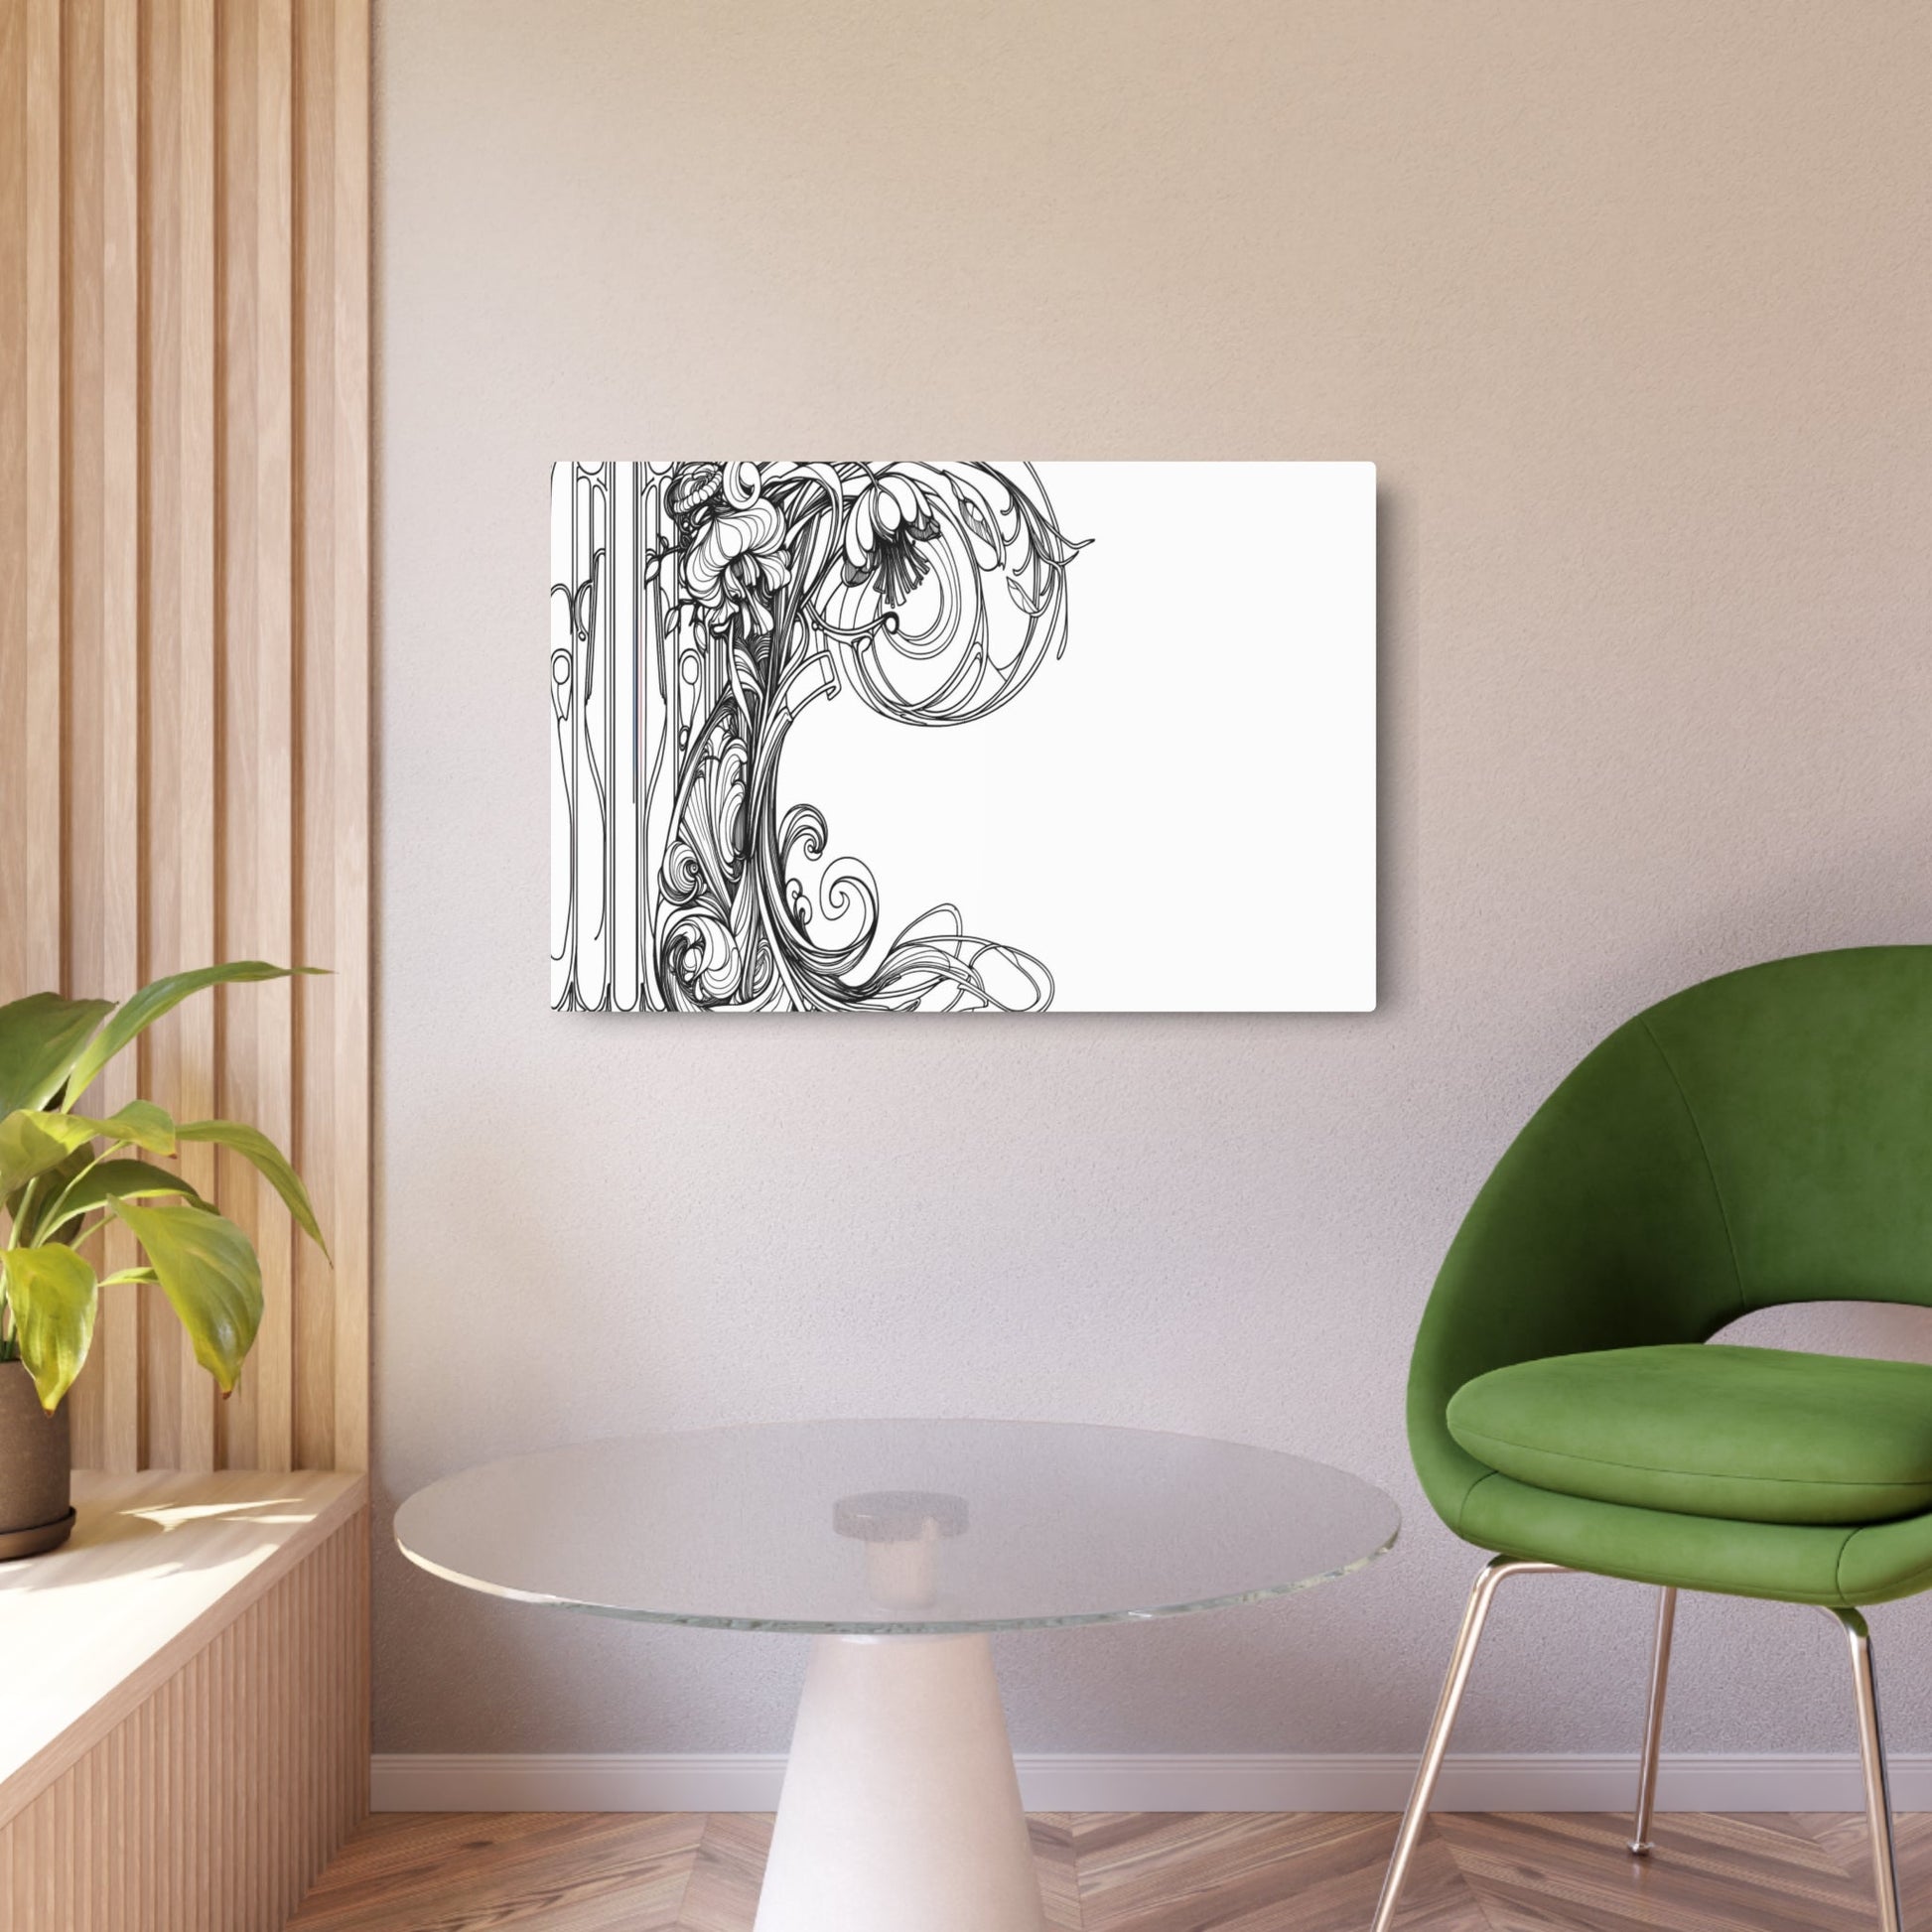 Metal Poster Art | "Art Nouveau Inspired Illustration with Natural Forms & Flowing Lines - Western Art Styles Collection" - Metal Poster Art 36″ x 24″ (Horizontal) 0.12''